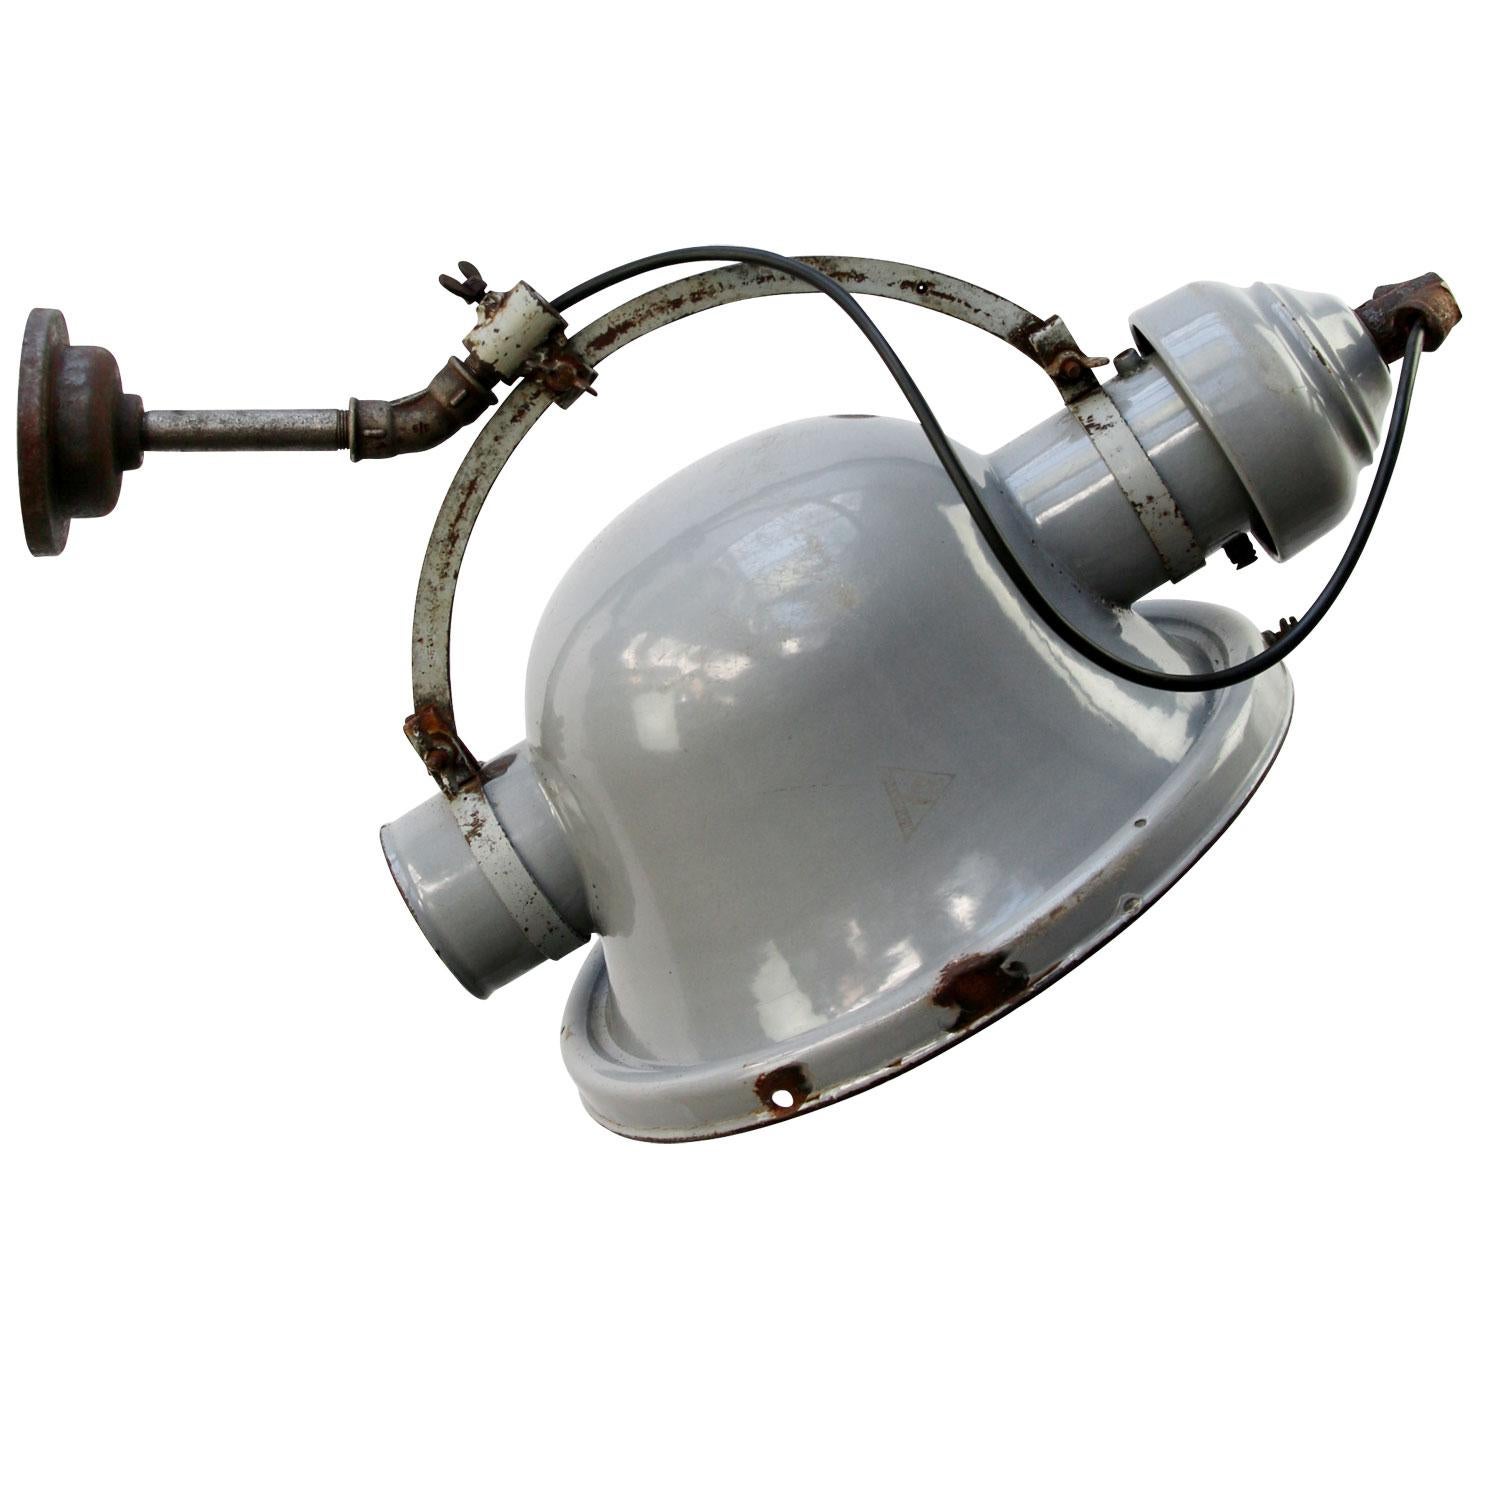 Large industrial wall light by Beseg Licht Germany
grey enamel, cast iron parts and wall piece

Weight: 4.00 kg / 8.8 lb

Priced per individual item. All lamps have been made suitable by international standards for incandescent light bulbs,